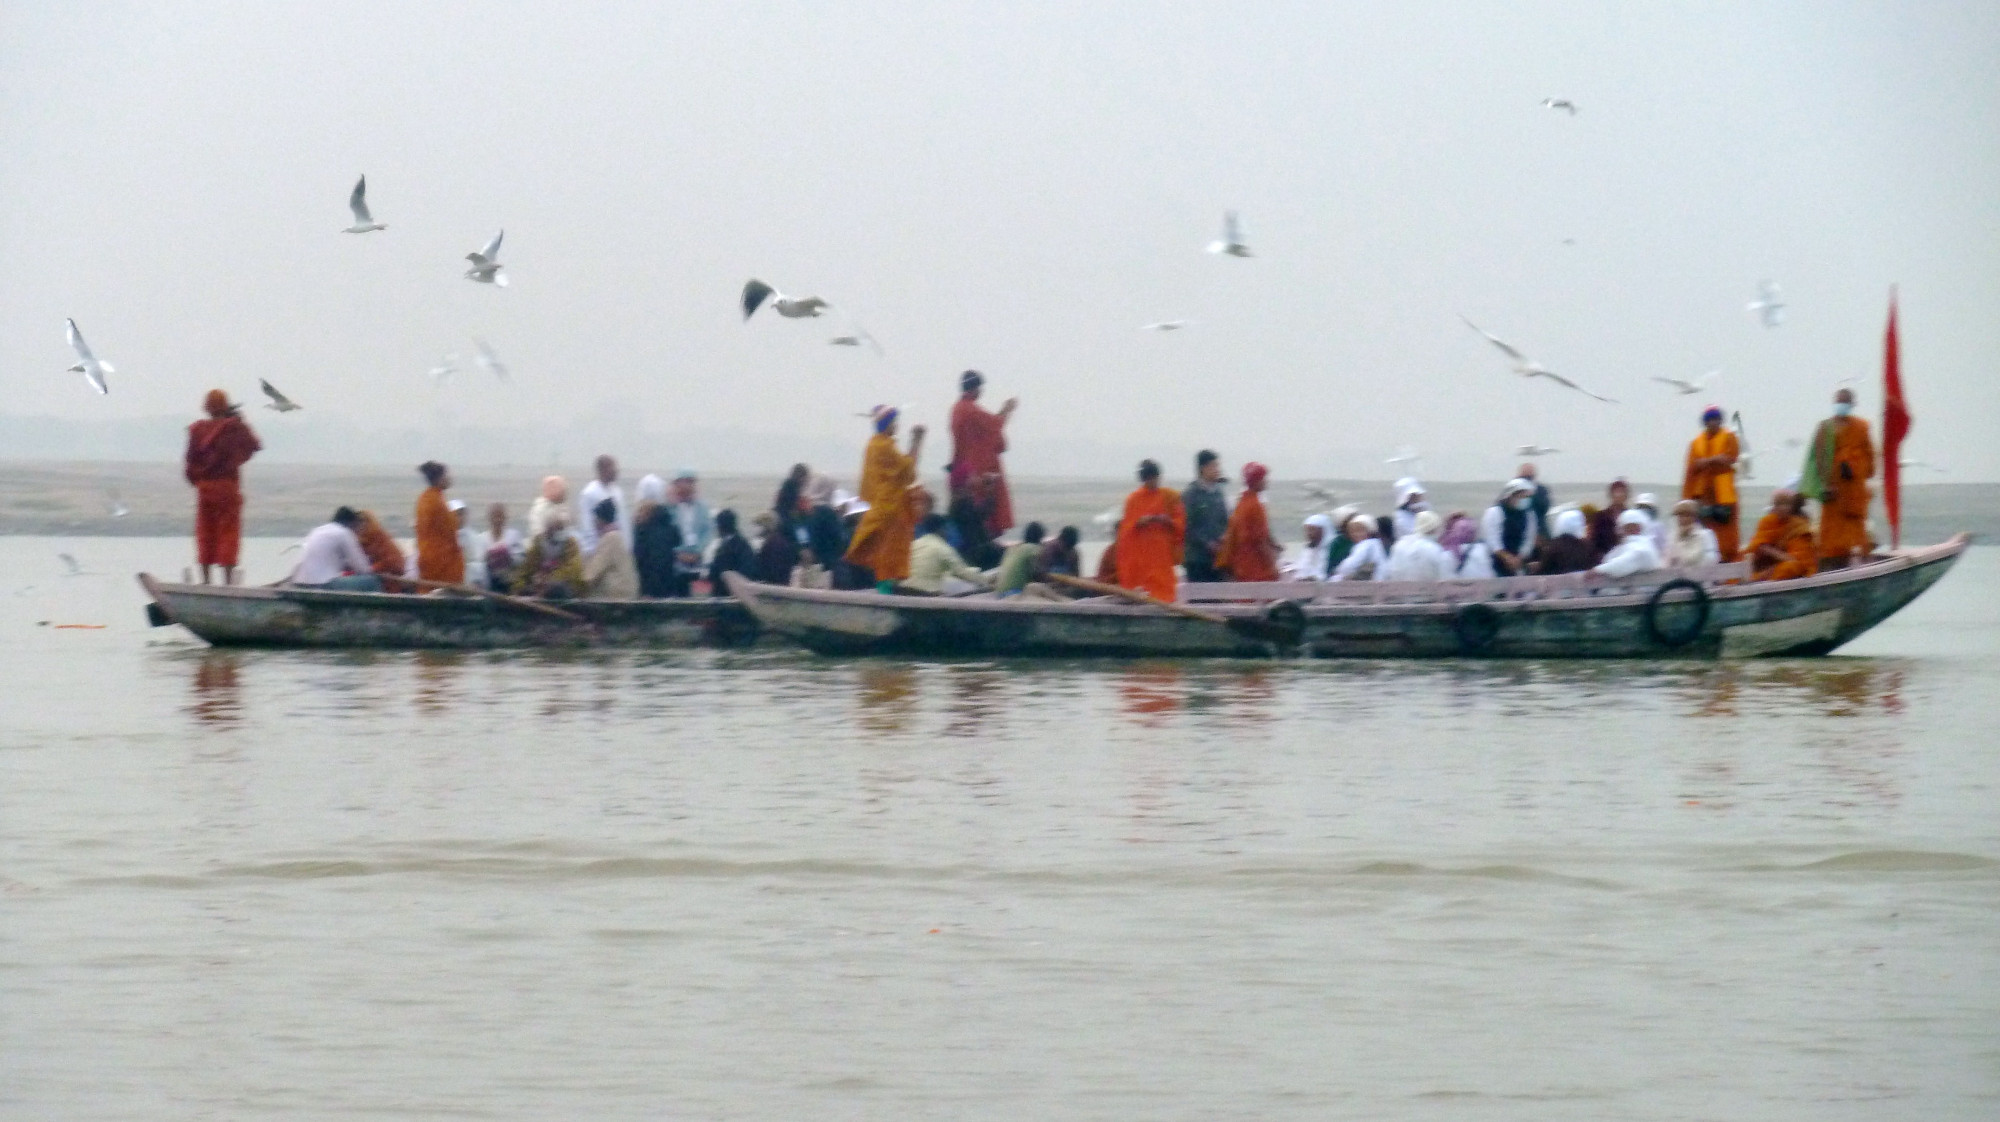 Early Morning Boat Ride Ganges